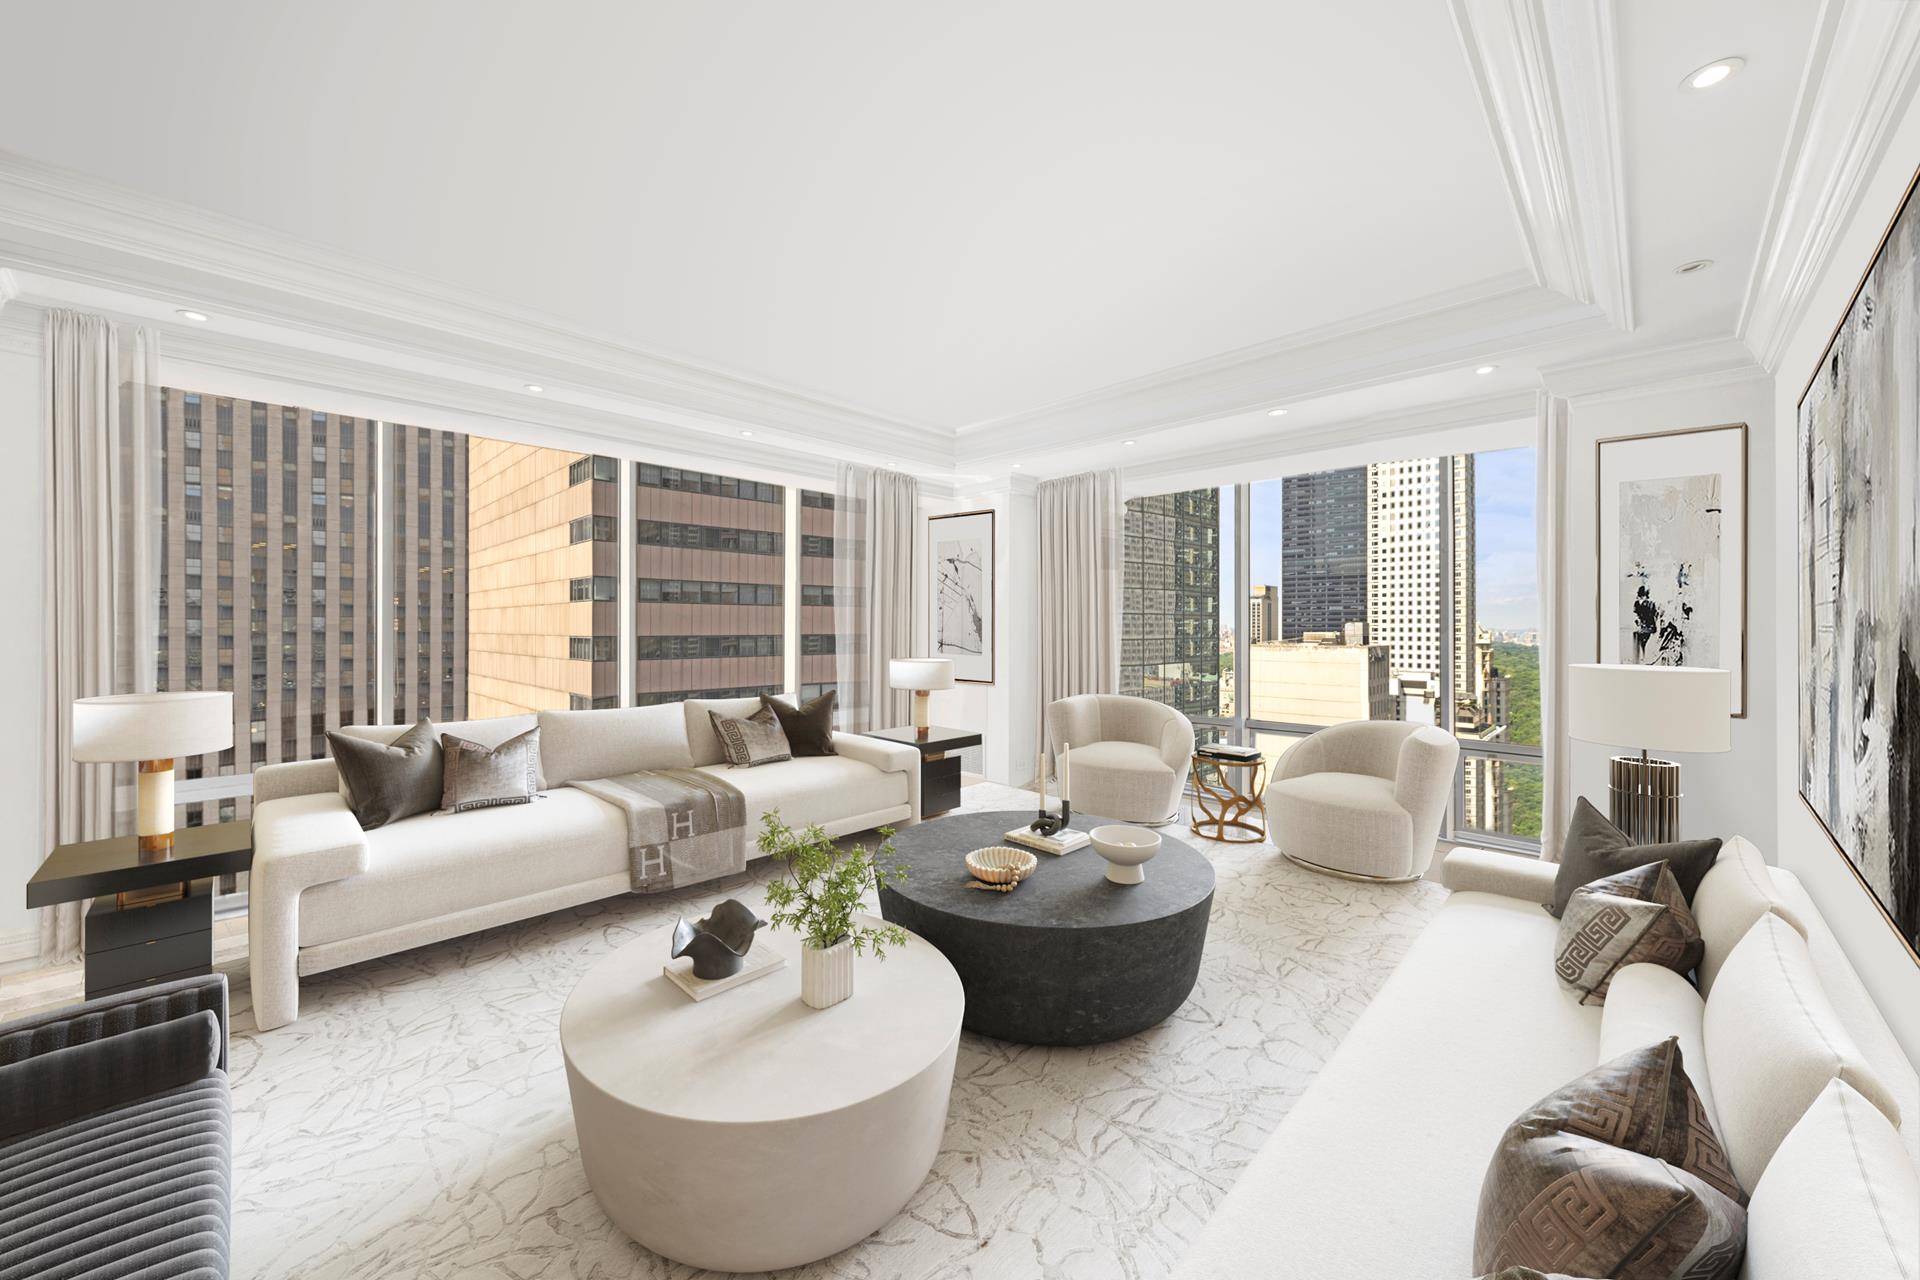 300K PRICE ADJUSTMENT ! This magnificent apartment home in one of New York's world famous building perfectly embodies a luxurious lifestyle providing access to hundreds of famous New York destinations, ...